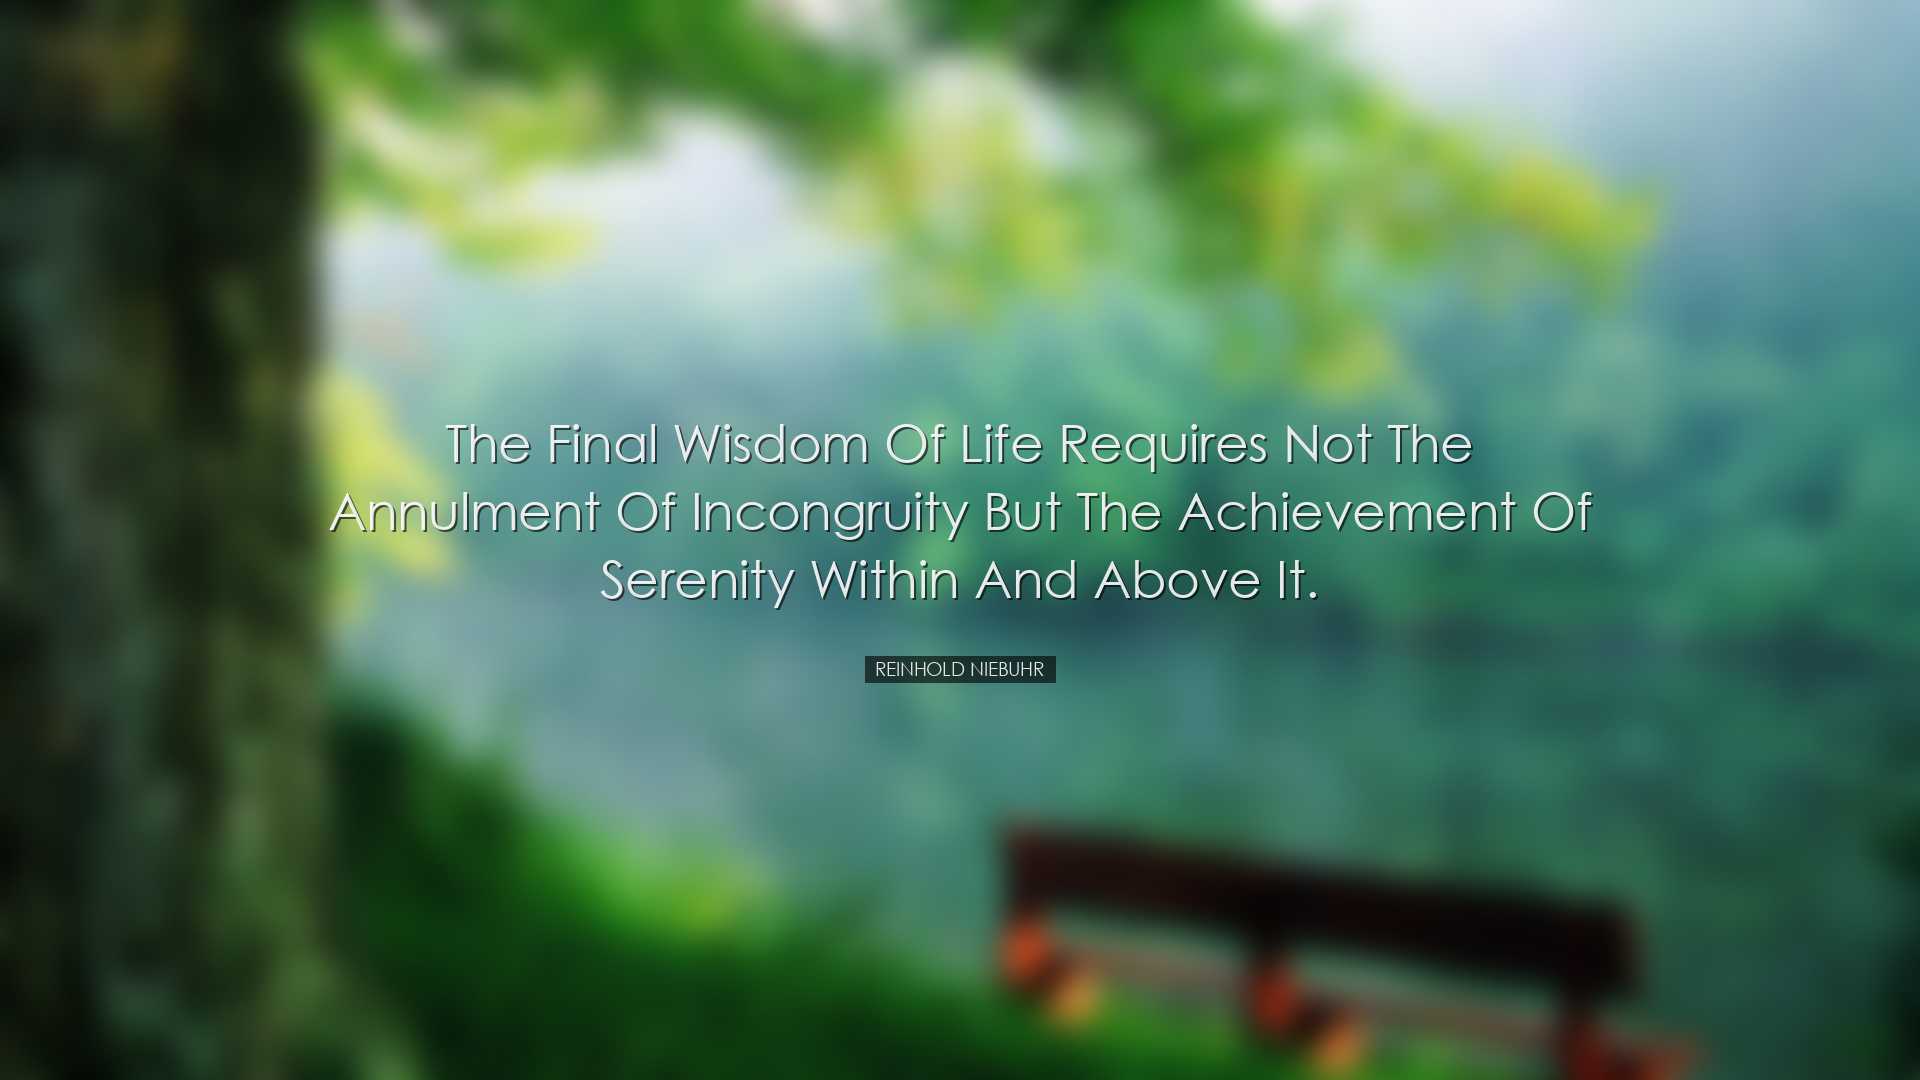 The final wisdom of life requires not the annulment of incongruity